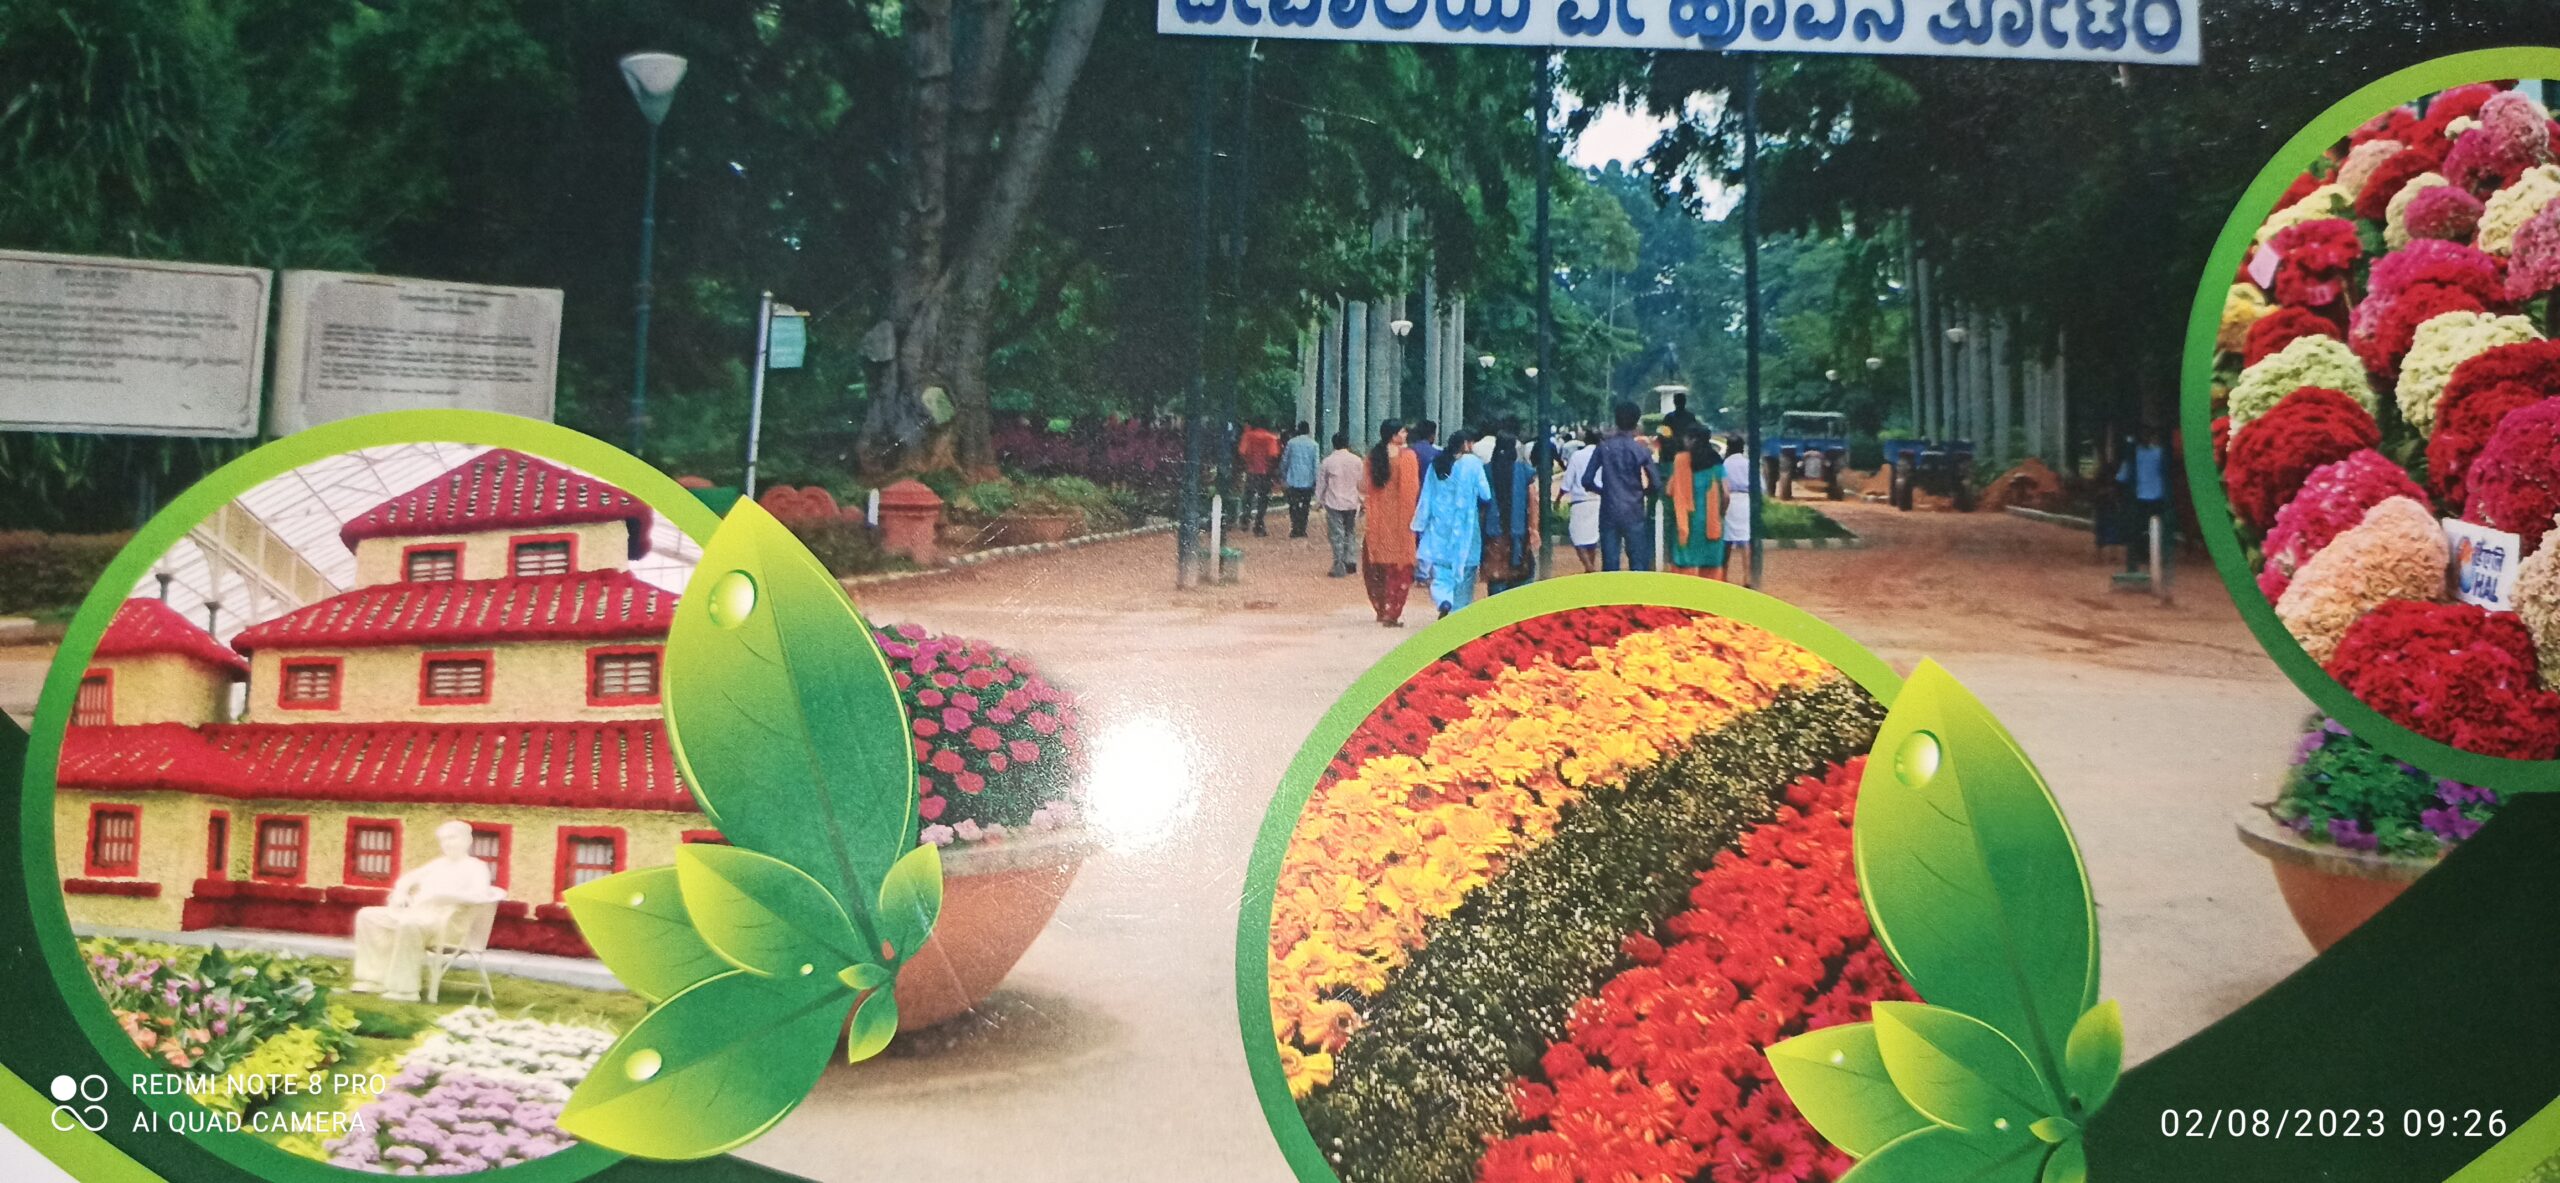 FRUIT AND FLOWER SHOW AT LALBAGH FROM AUGUST 4, THE GRAND PERFORMRNCE OF KENGAL HANUMANTAIAH IS EXPECTED TO ATTARCT MORE THAN 10 LAKH